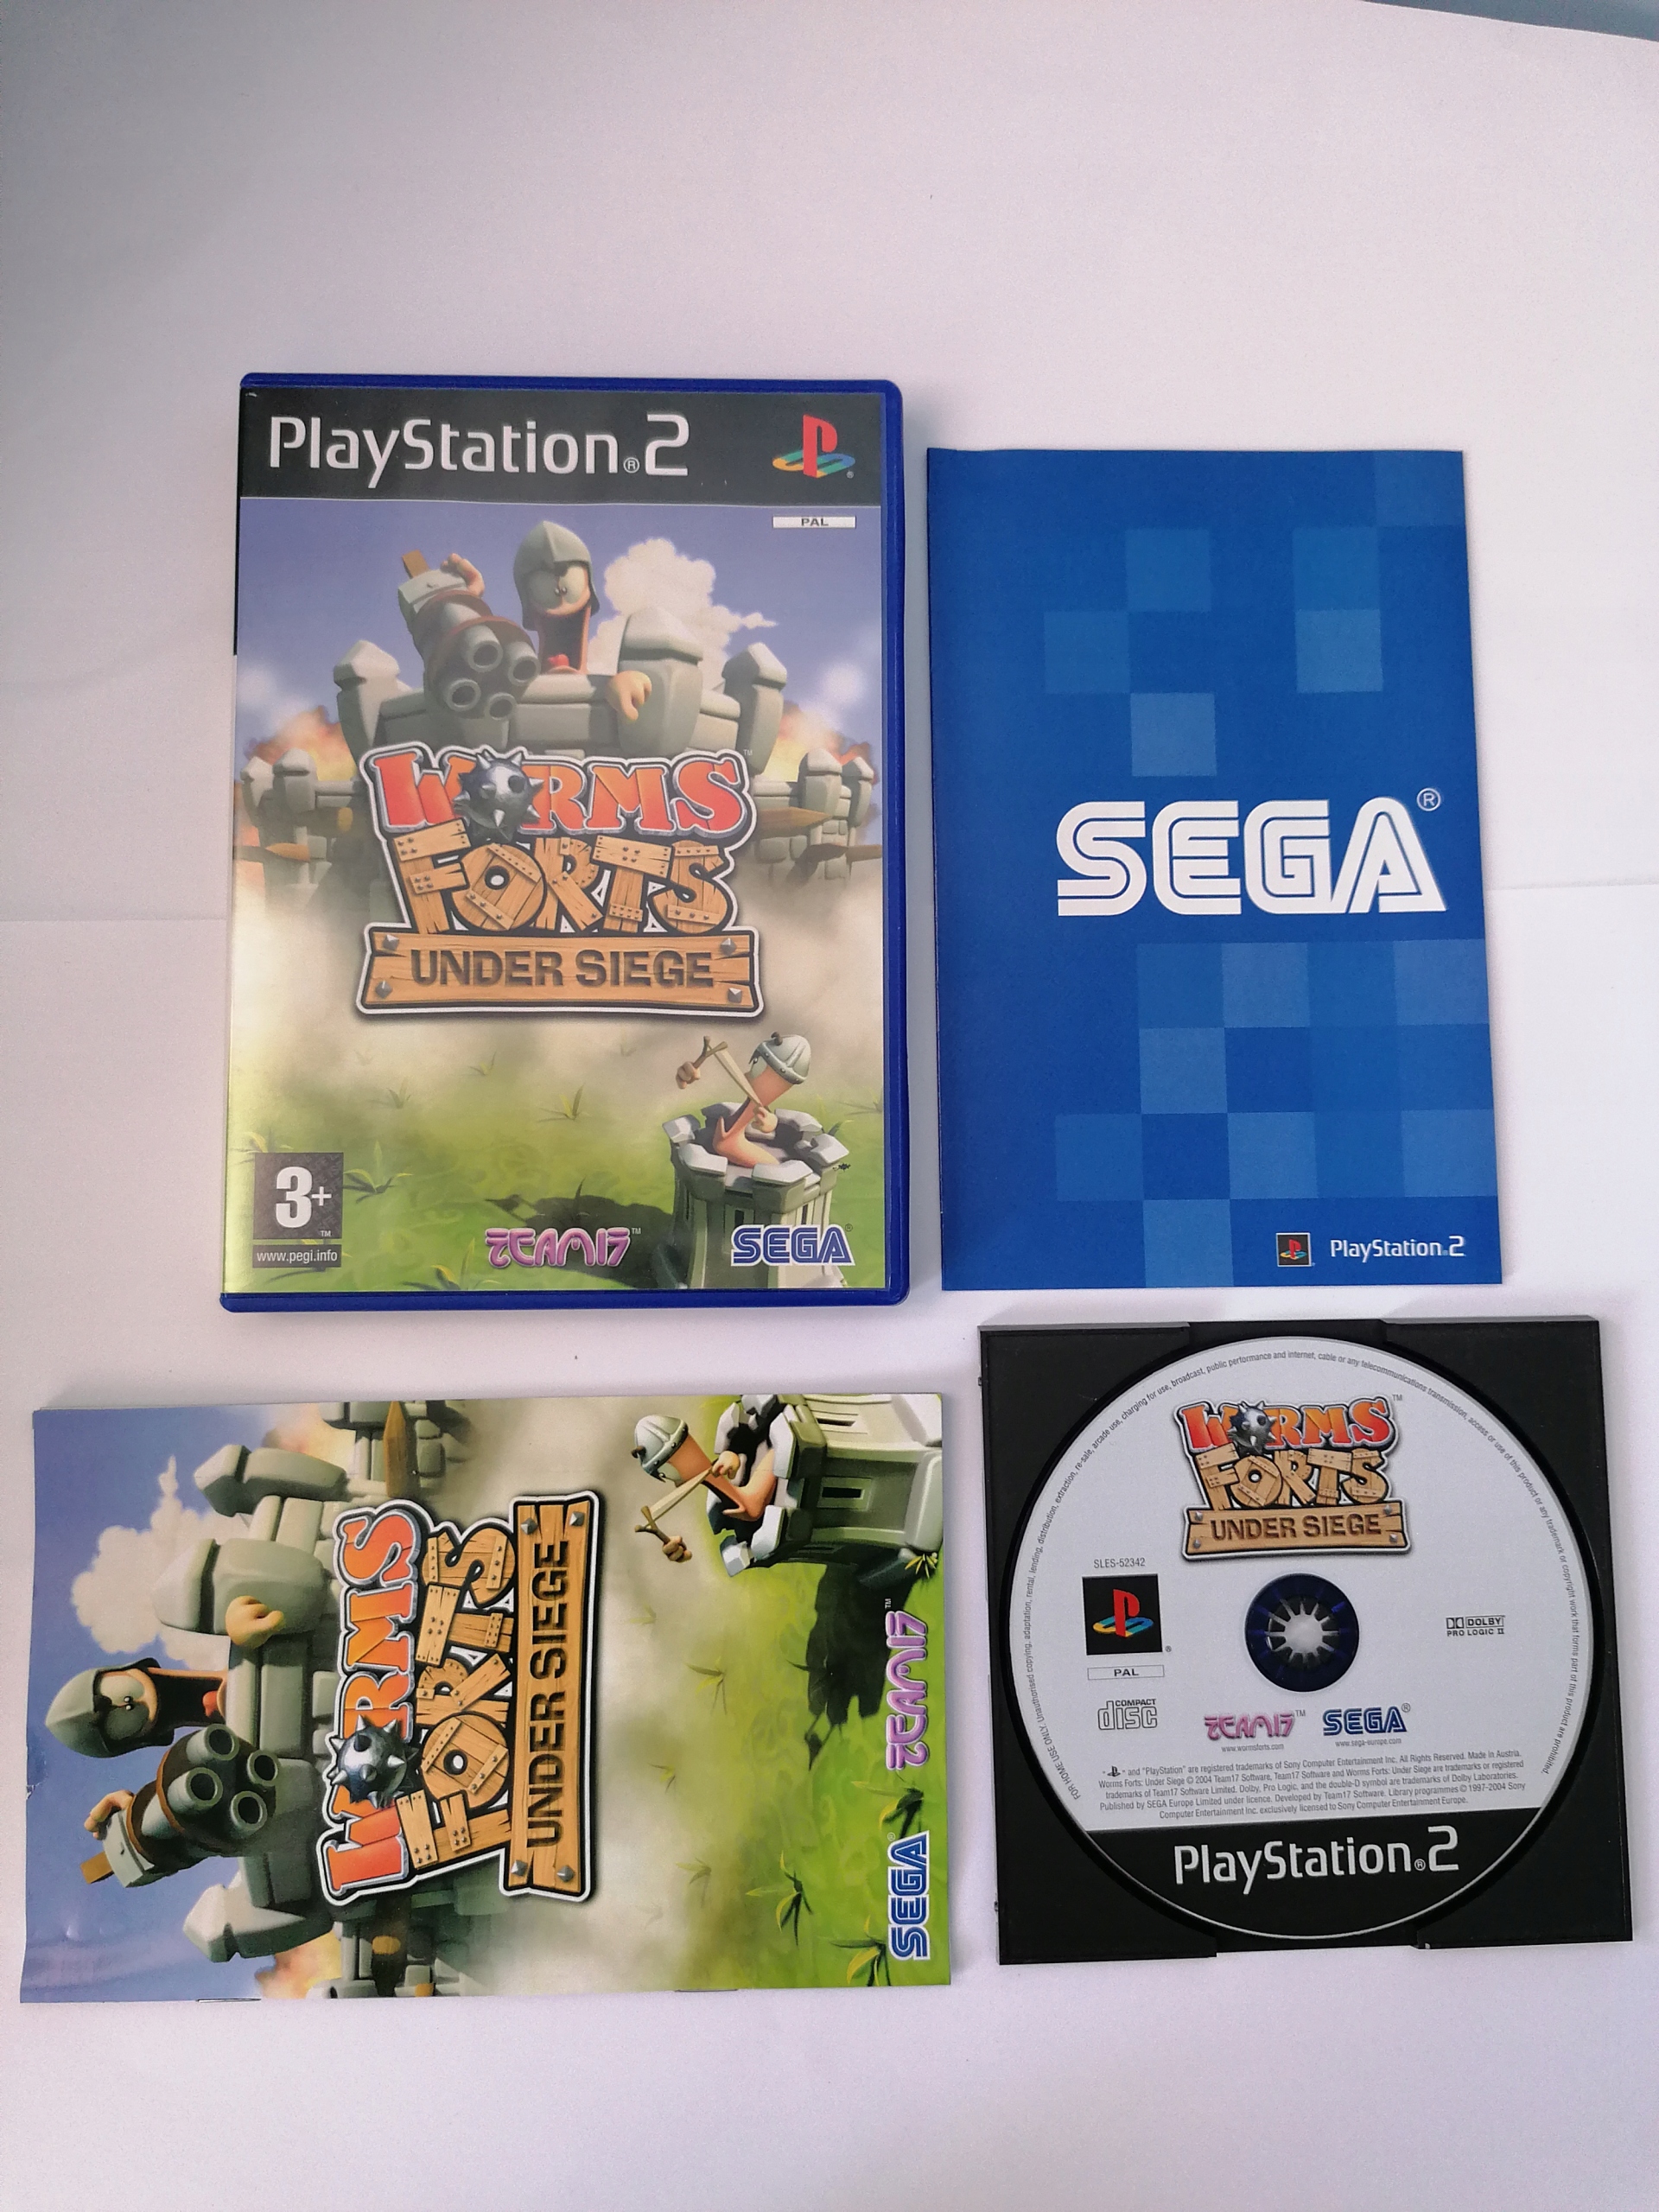 Worms Forts Under Siege PS2 Game Playstation 2 For Sale